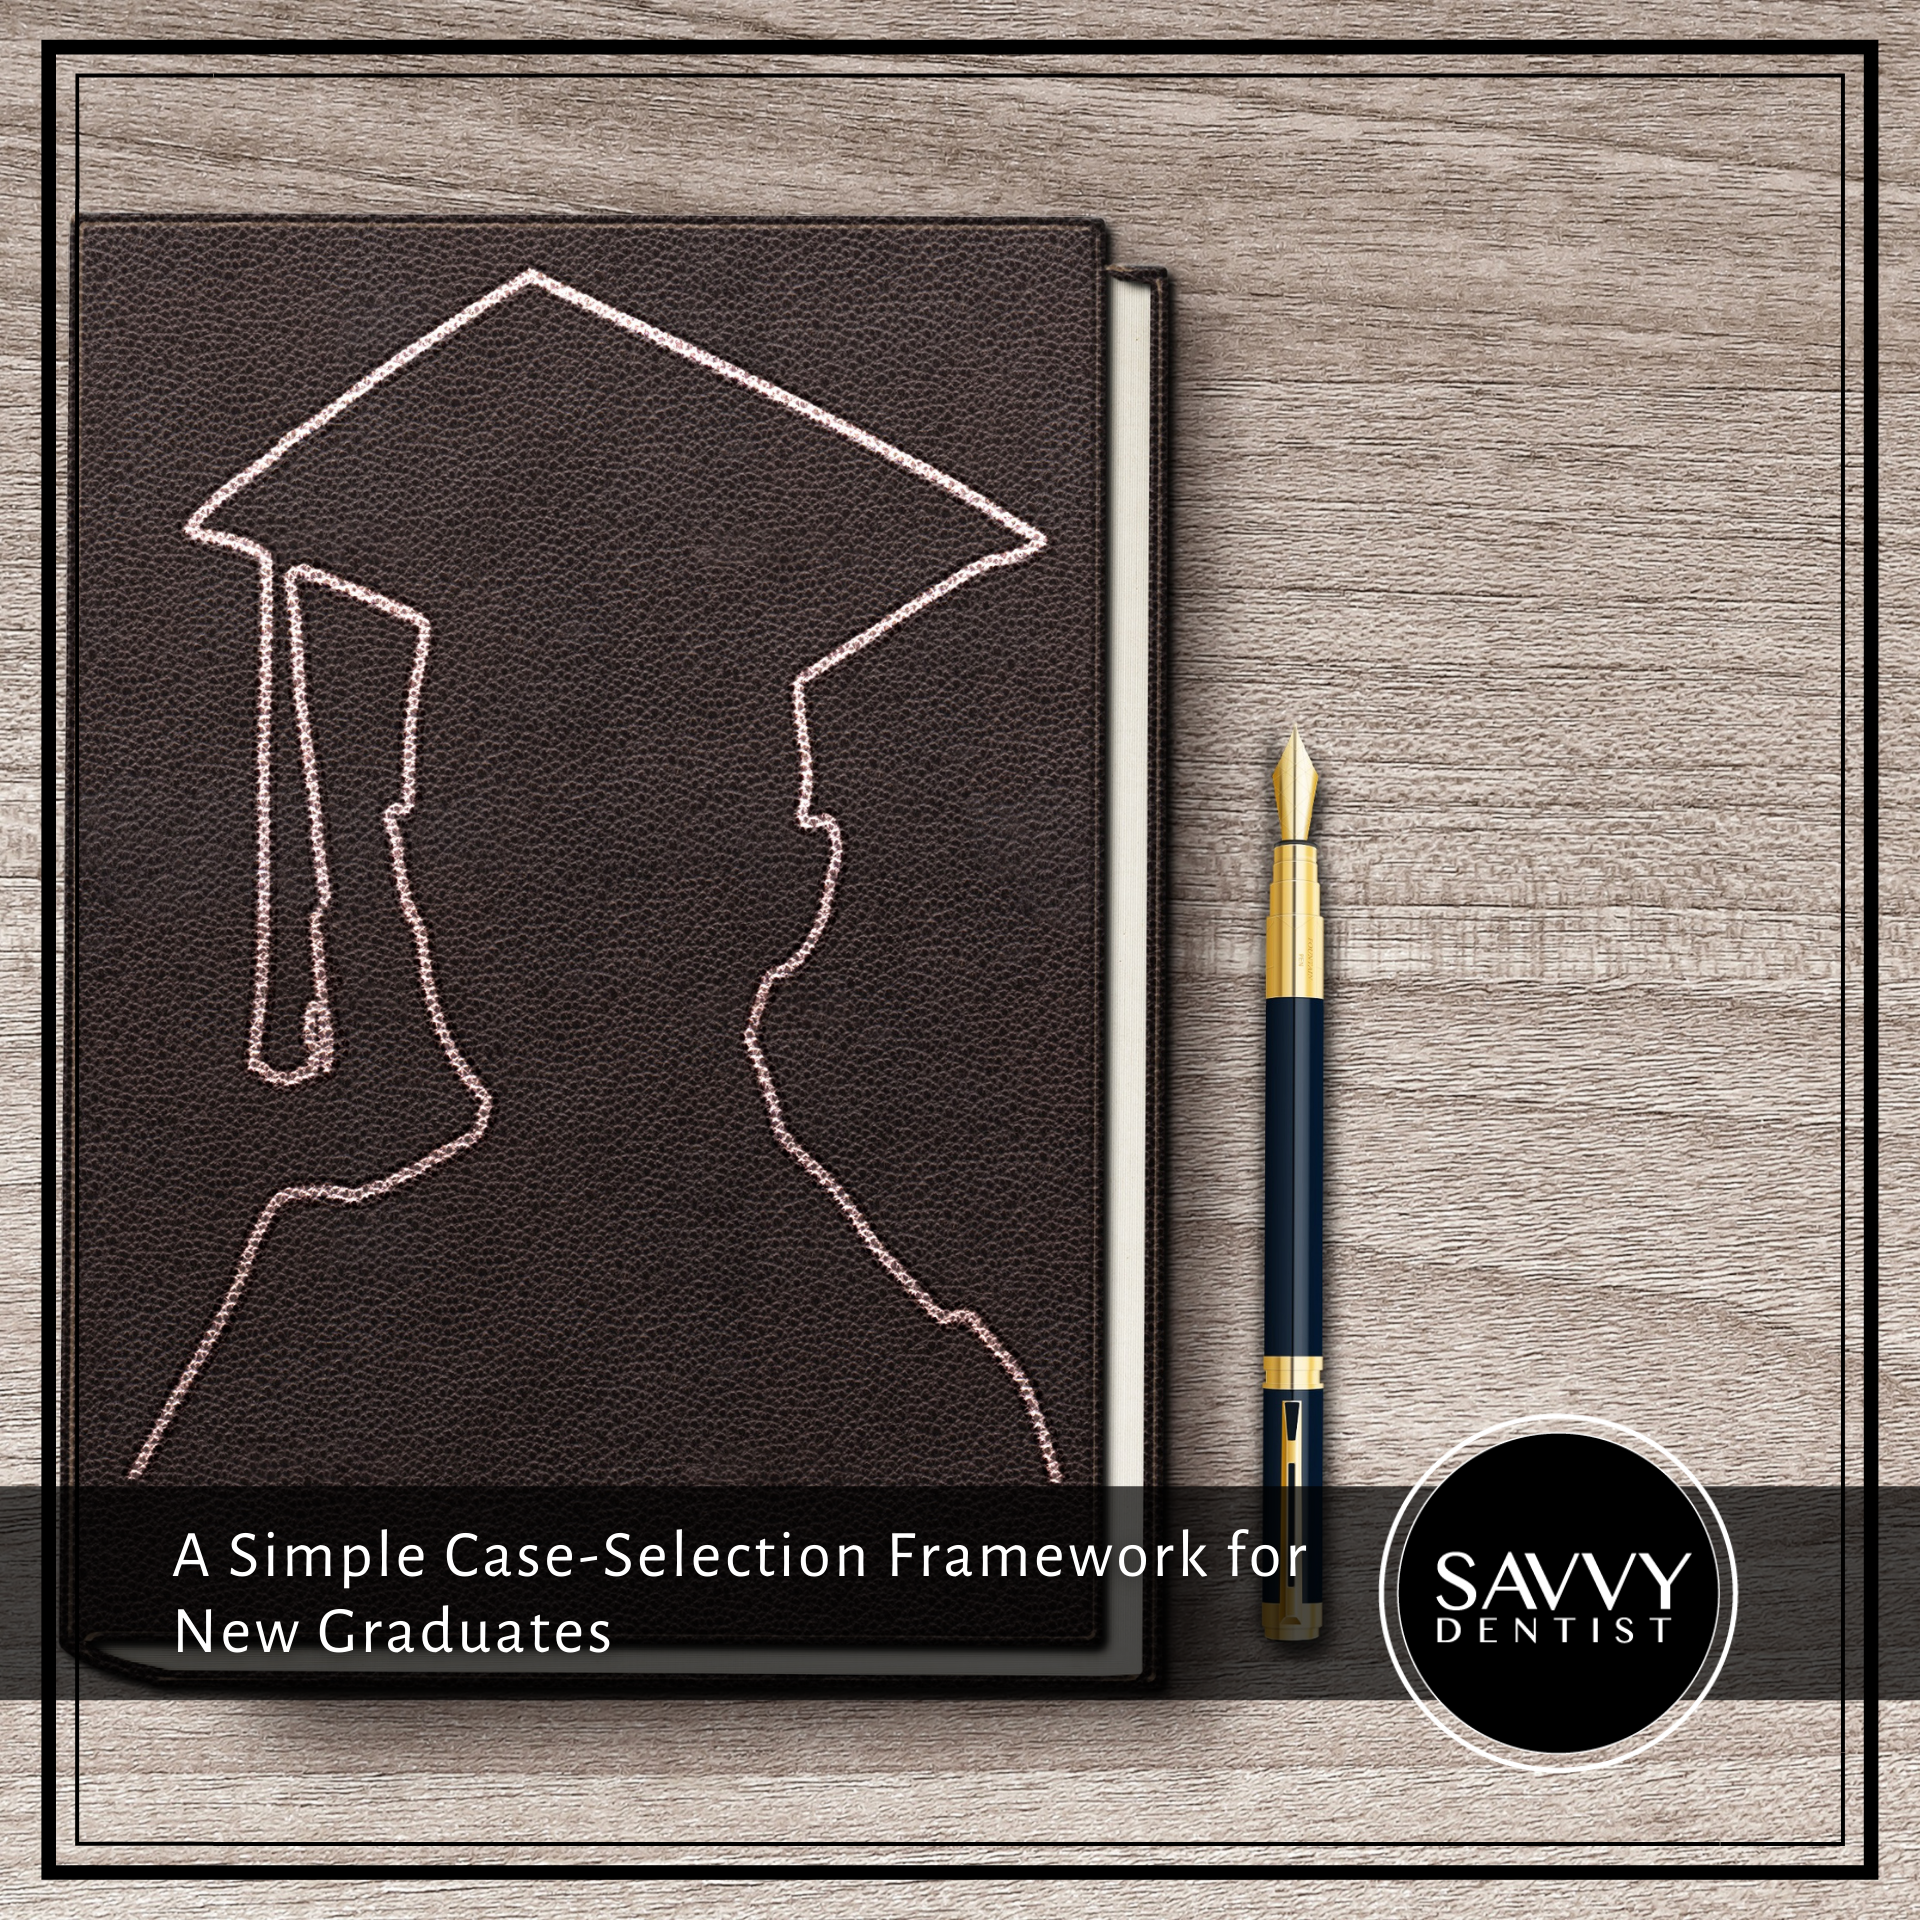 A Simple Case-Selection Framework for New Graduates